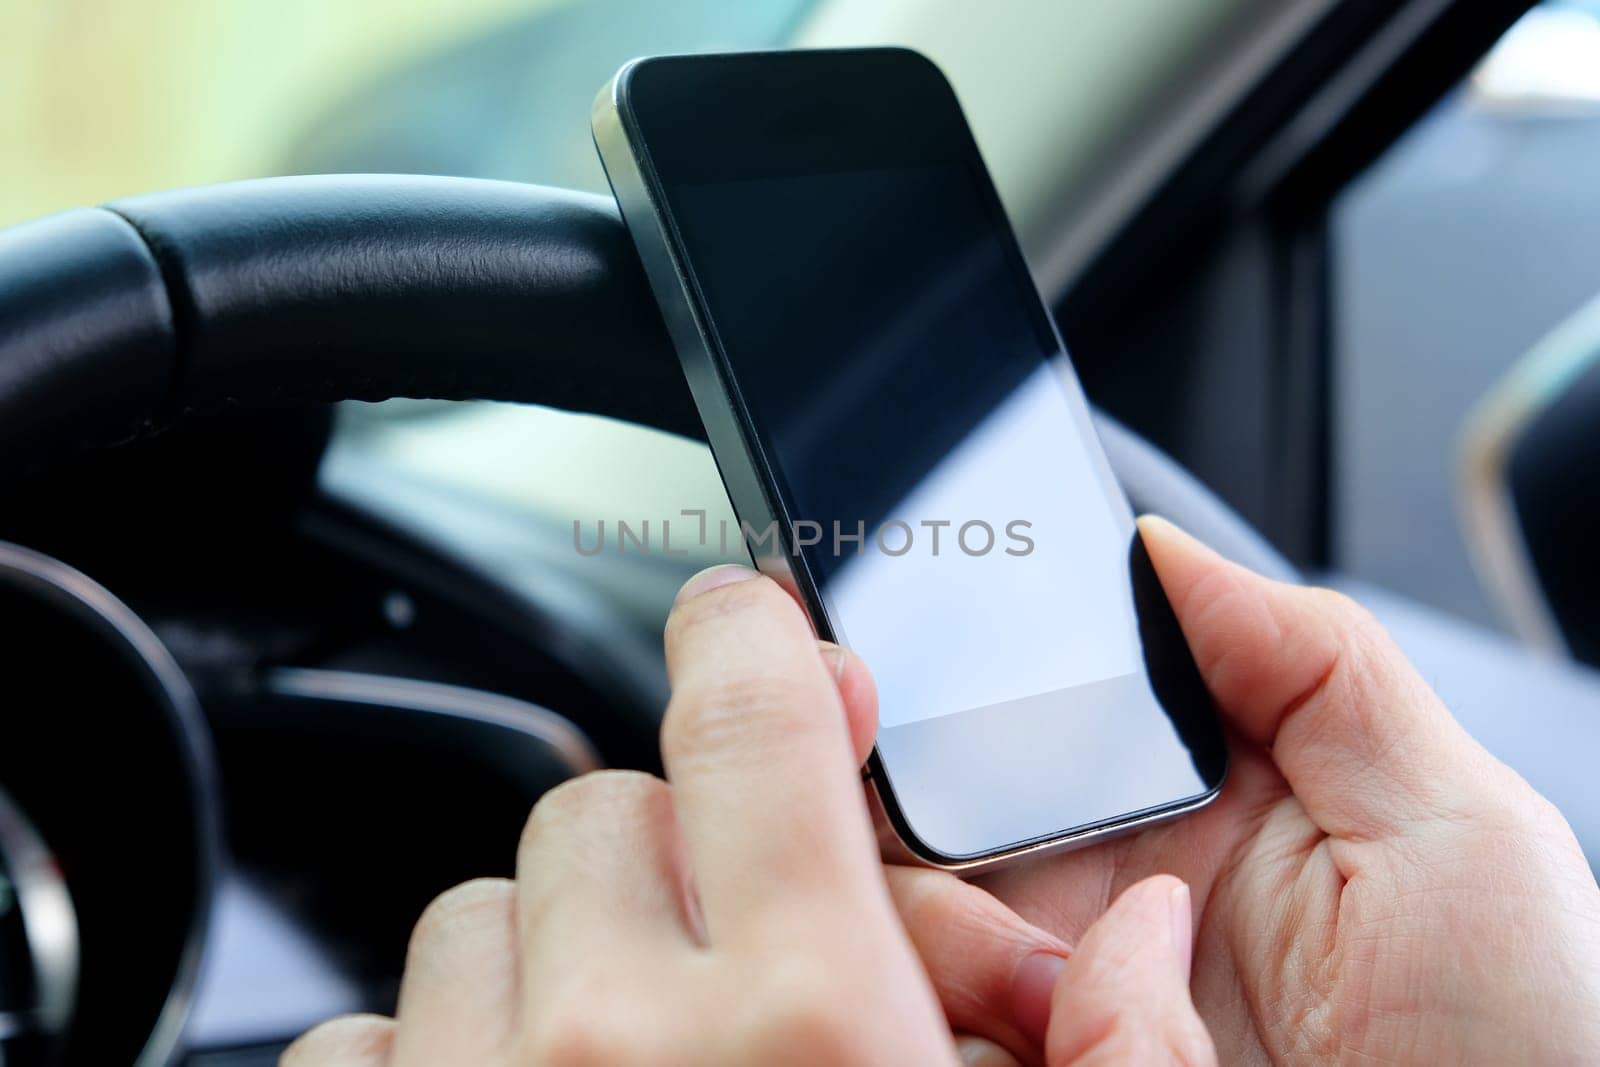 using a mobile phone inside of a car by ponsulak